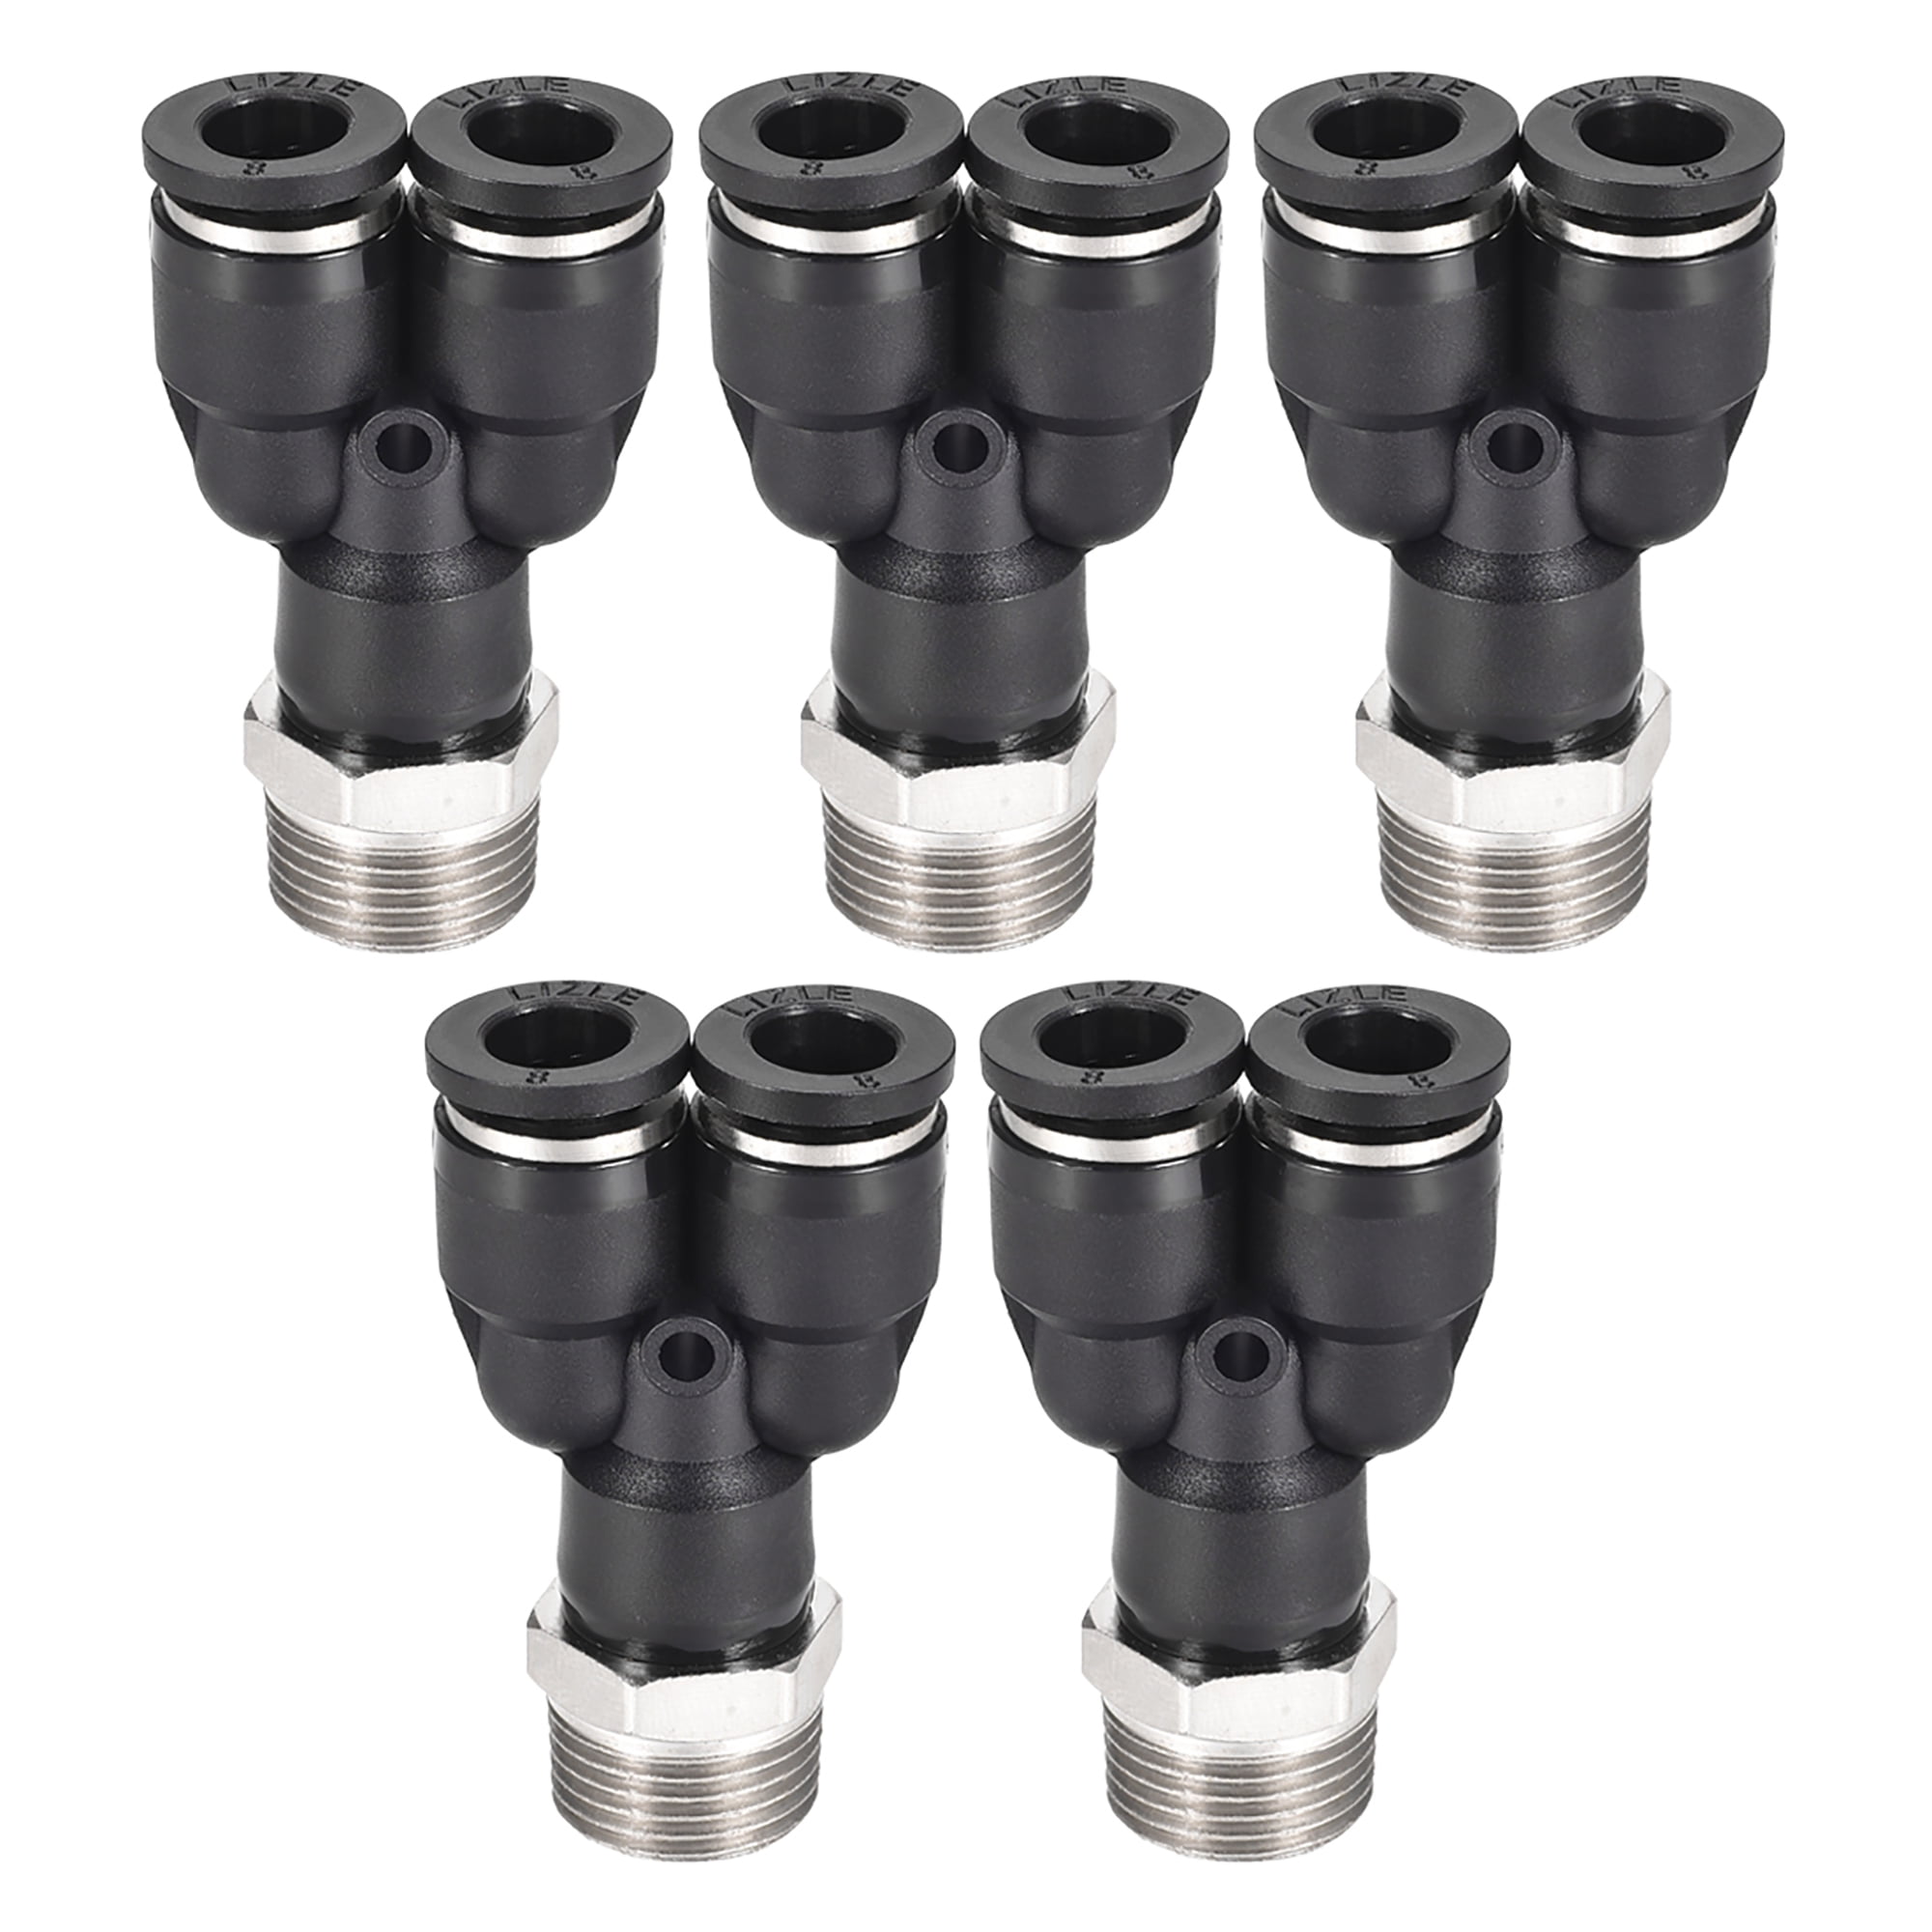 5Pcs 8mm Y Shaped Push-to-Connect Pneumatic Fittings 